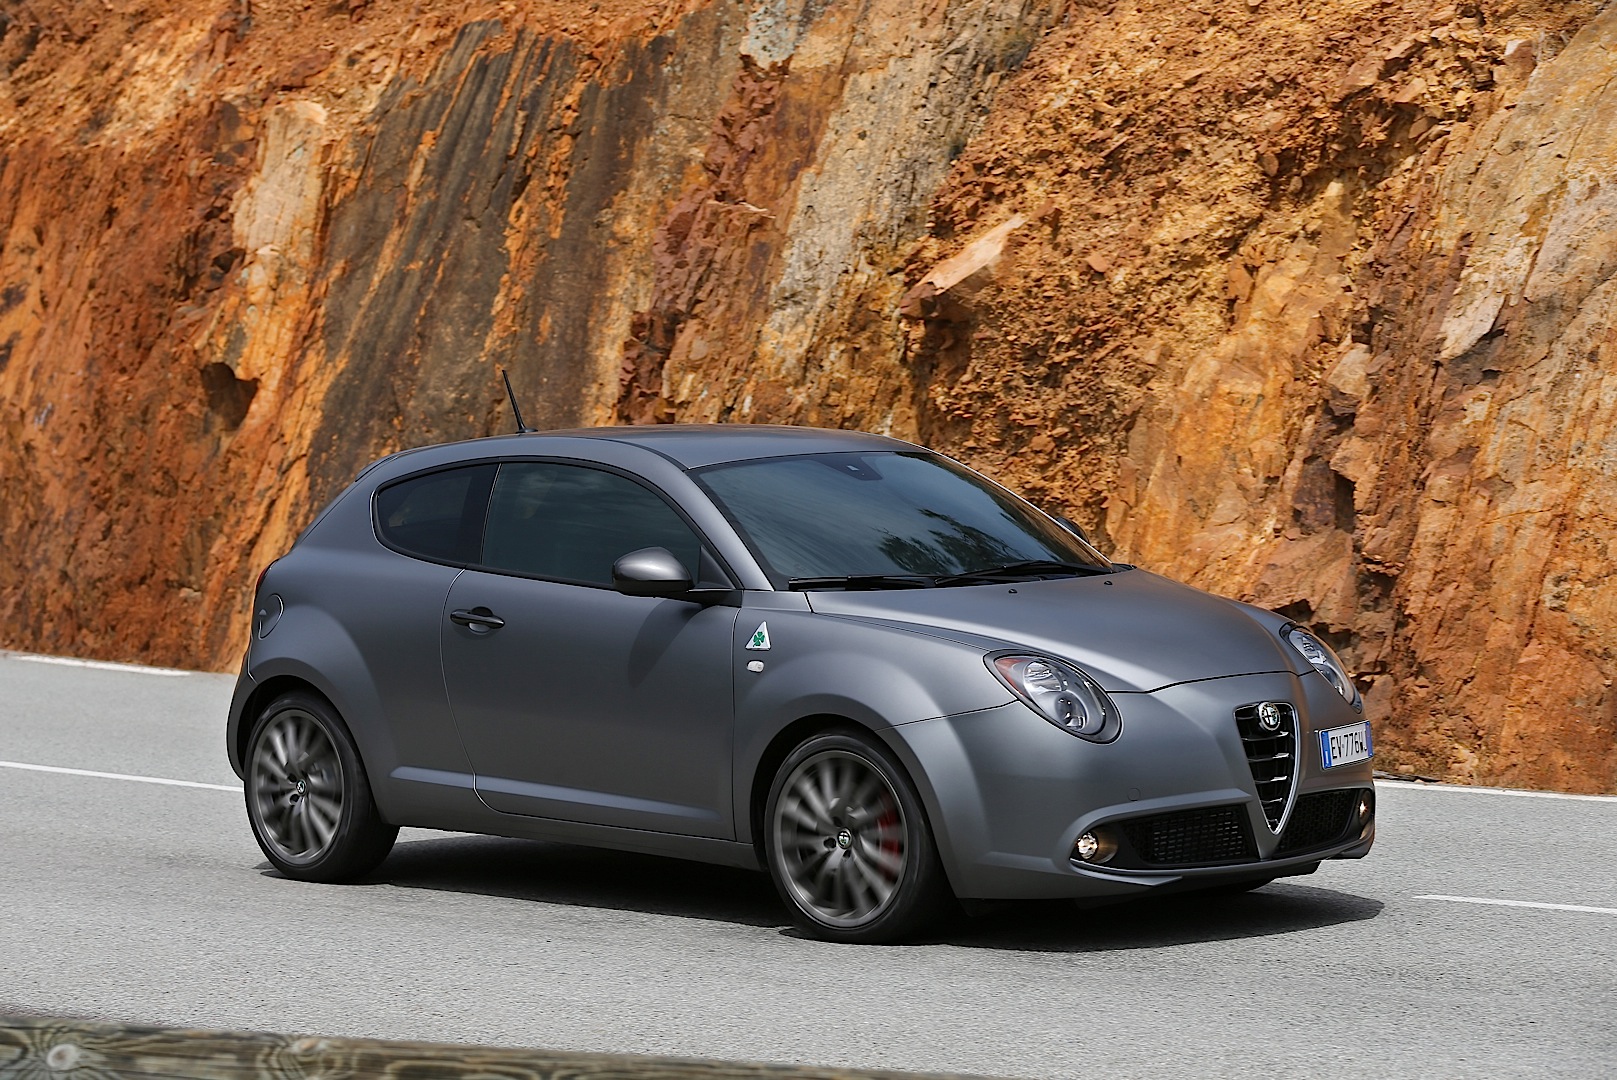 Cool Car For Young Drivers? The 170PS Alfa Romeo MiTO QV Review 